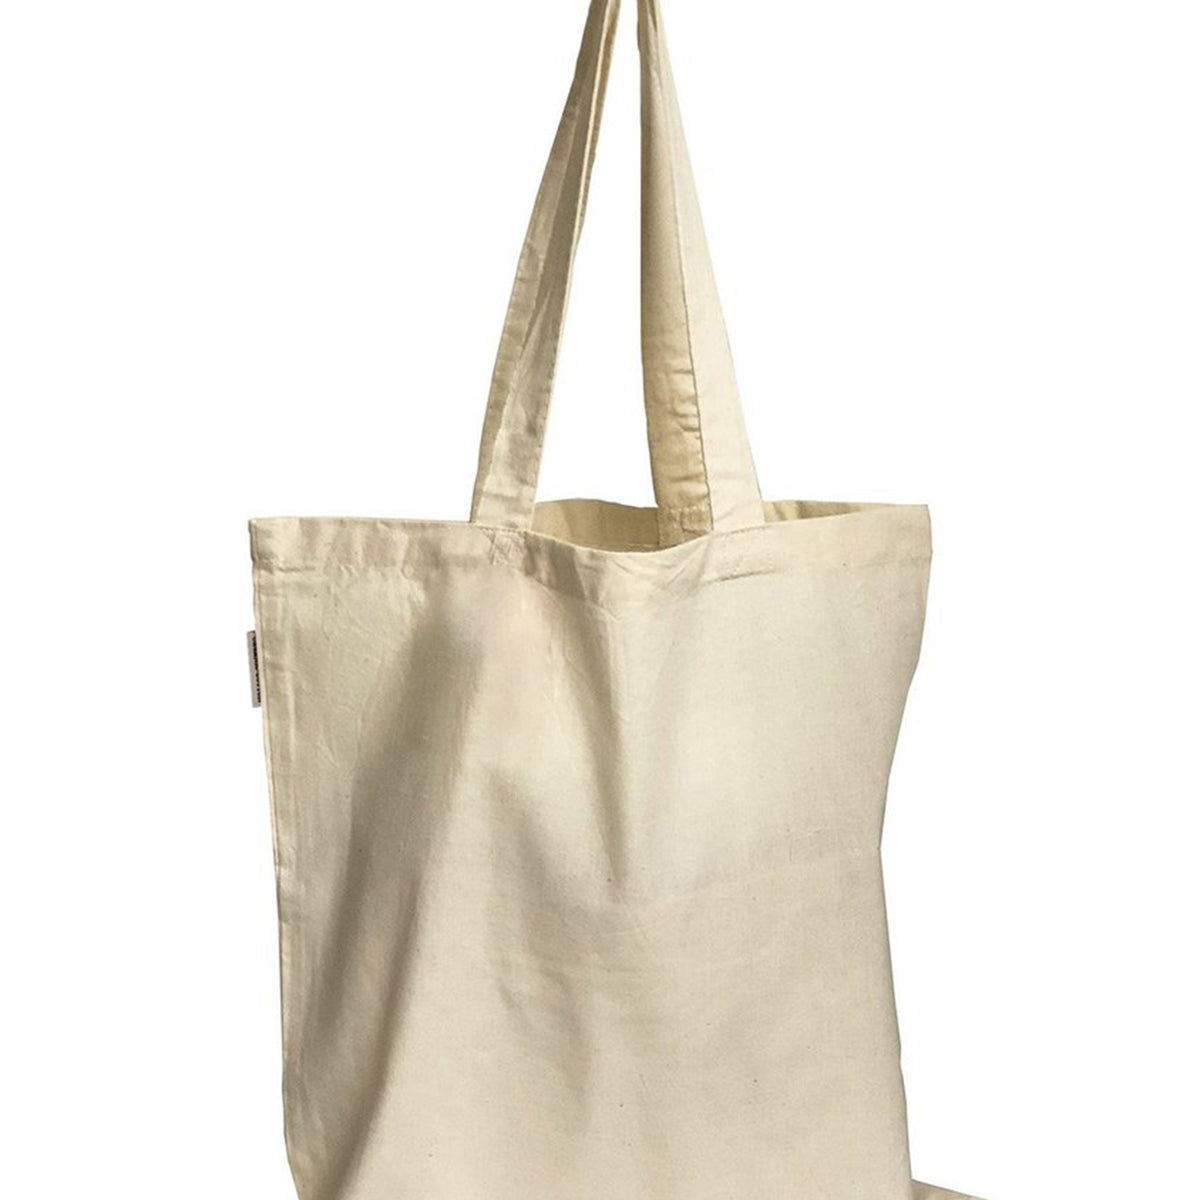 Fabric Bags  100% Cotton